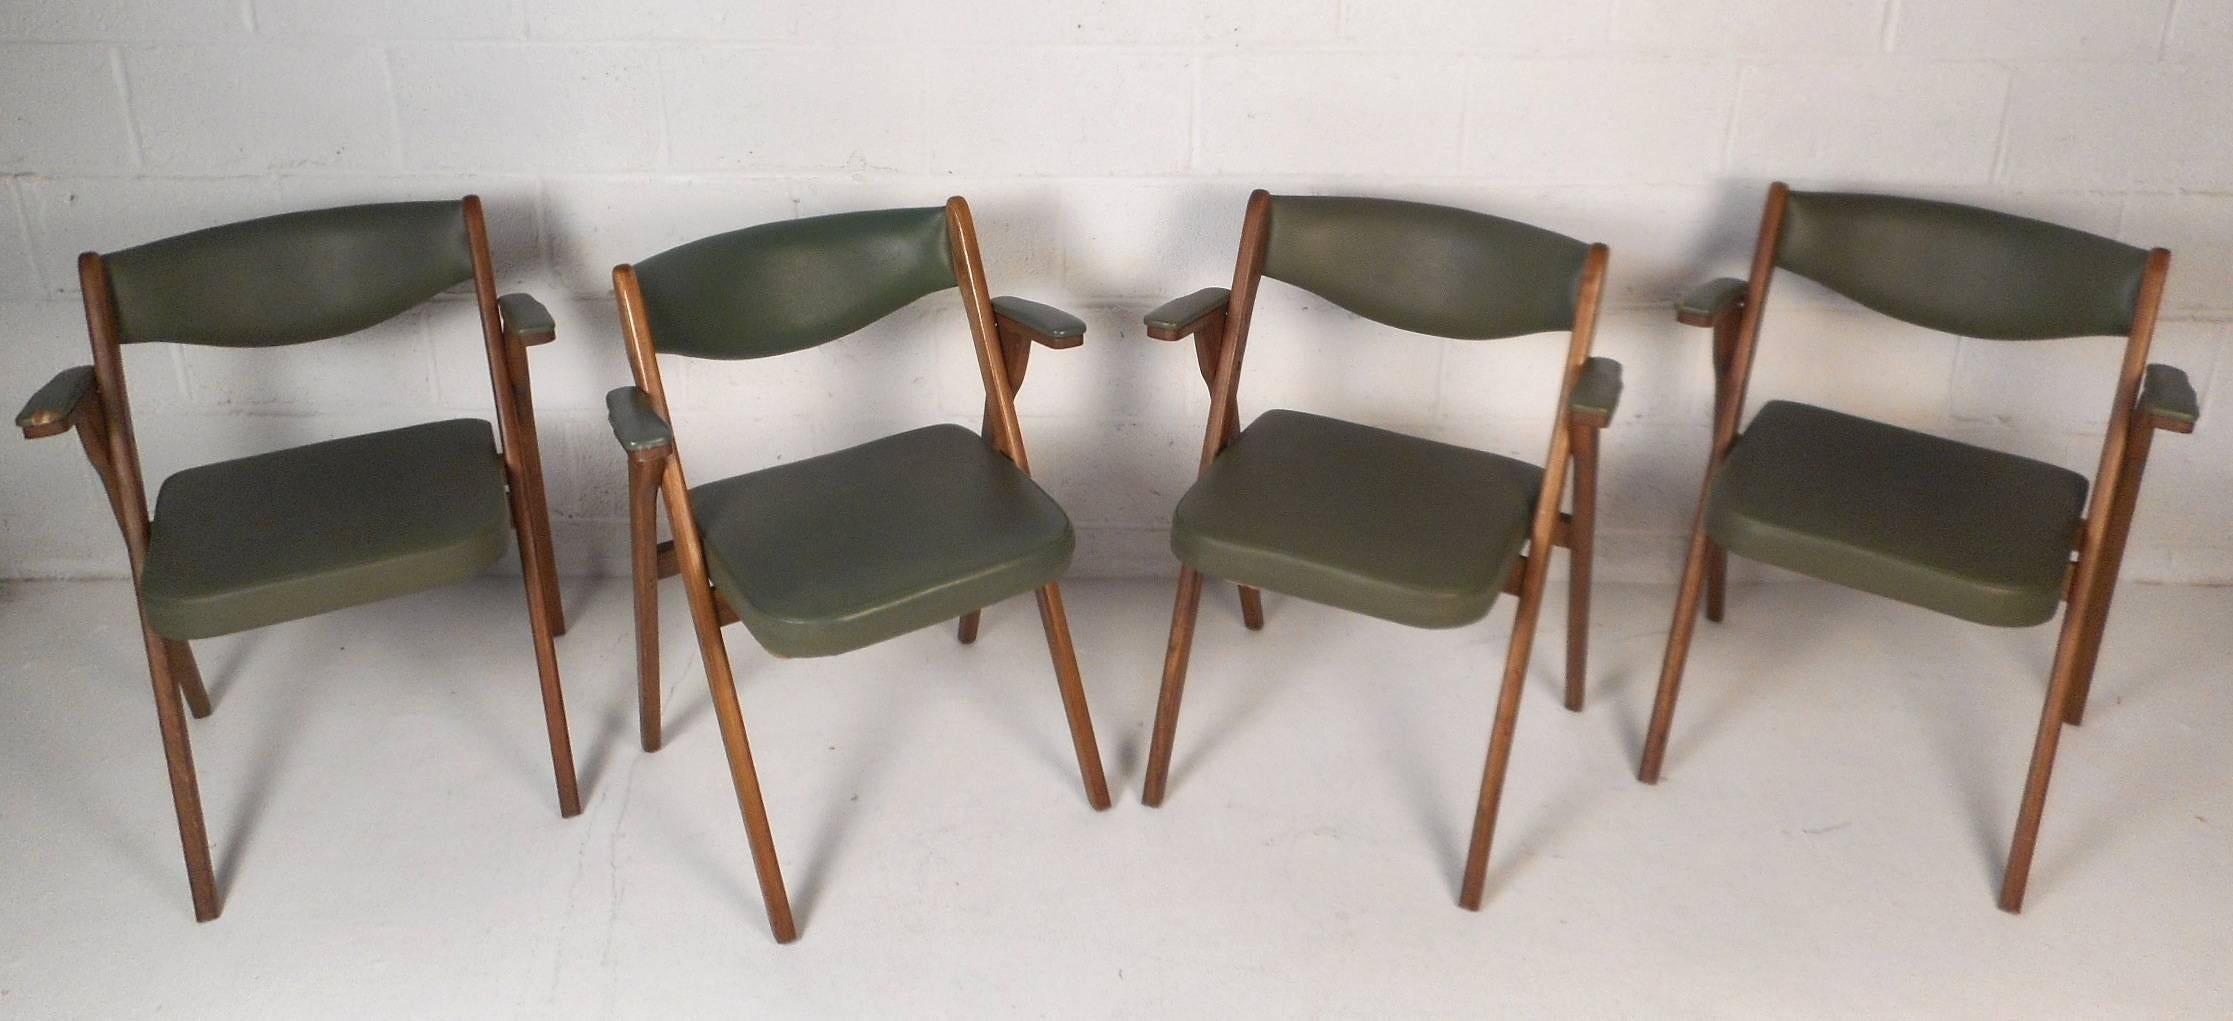 This beautiful set of four vintage modern chairs feature an angled walnut frame that conveniently folds up for storage. A unique curved back rest, padded arm rests, and a sturdy walnut frame show quality craftsmanship. The thick padded seat and back